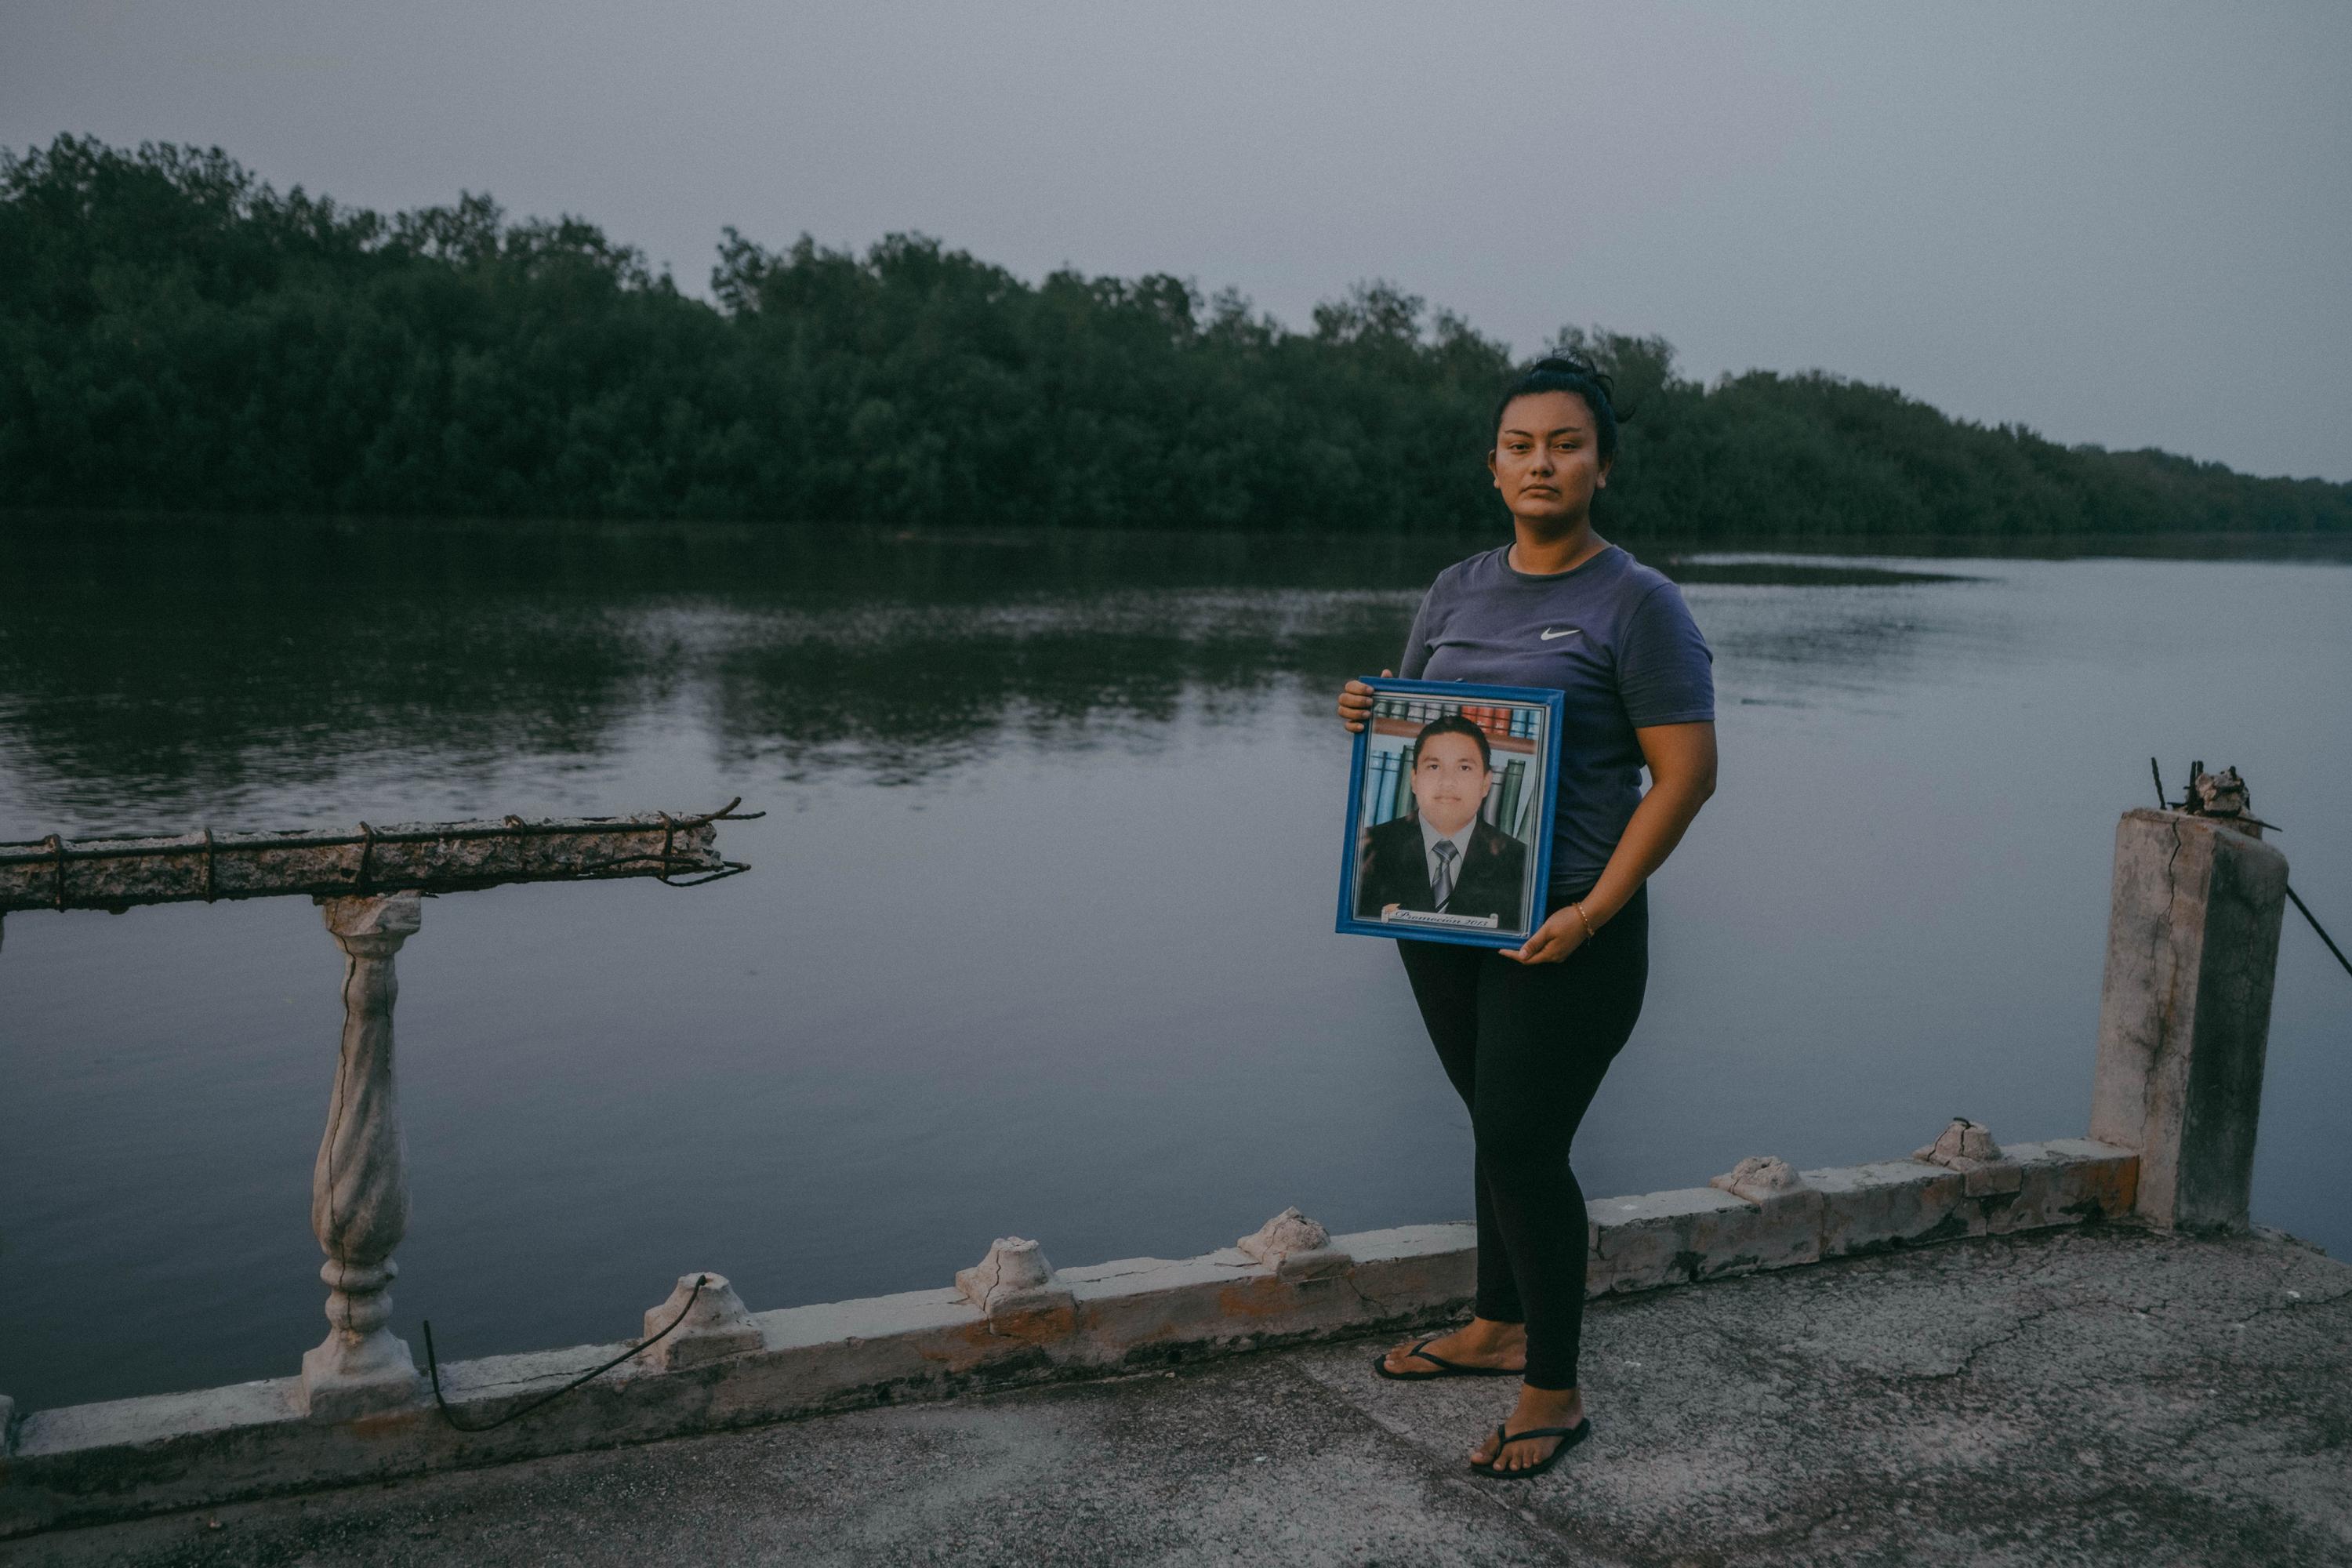 On June 30, 2022, Claudia Tejada and her husband, Dionisio Ramírez, were cleaning a swimming pool in the Jaltepeque estuary in the department of La Paz when six police officers entered the ranch that Dionisio’s parents were caretaking. They had no prior record for Dionisio, but told him not to resist, that they were only taking him in for questioning. They charged Dionisio with “illicit associations” and sent him to Mariona Prison. Claudia was 20 weeks pregnant. Three days later, due to an obstetric emergency, she lost her twin pregnancy. On August 25, Claudia’s in-laws received a call from social services at Zacamil hospital, asking them to come to the morgue to identify the body of their son. The Medical Examiner reported that Dionisio had died of pulmonary edema, a finding disputed by his family, who point to a photograph showing a penny-sized hole between his collarbone and neck. Claudia and her in-laws believe that Dionisio was murdered. A year and ten months after her husband’s death, Claudia says: “My husband voted for Bukele in 2019 and we received death in return. Last February, my in-laws and I annulled our presidential votes in protest. The damage they did to us is irreparable. To this day, my six-year-old daughter asks when her dad is coming back. The state of exception took away part of my life. How can that be replaced?” Photo by Carlos Barrera.